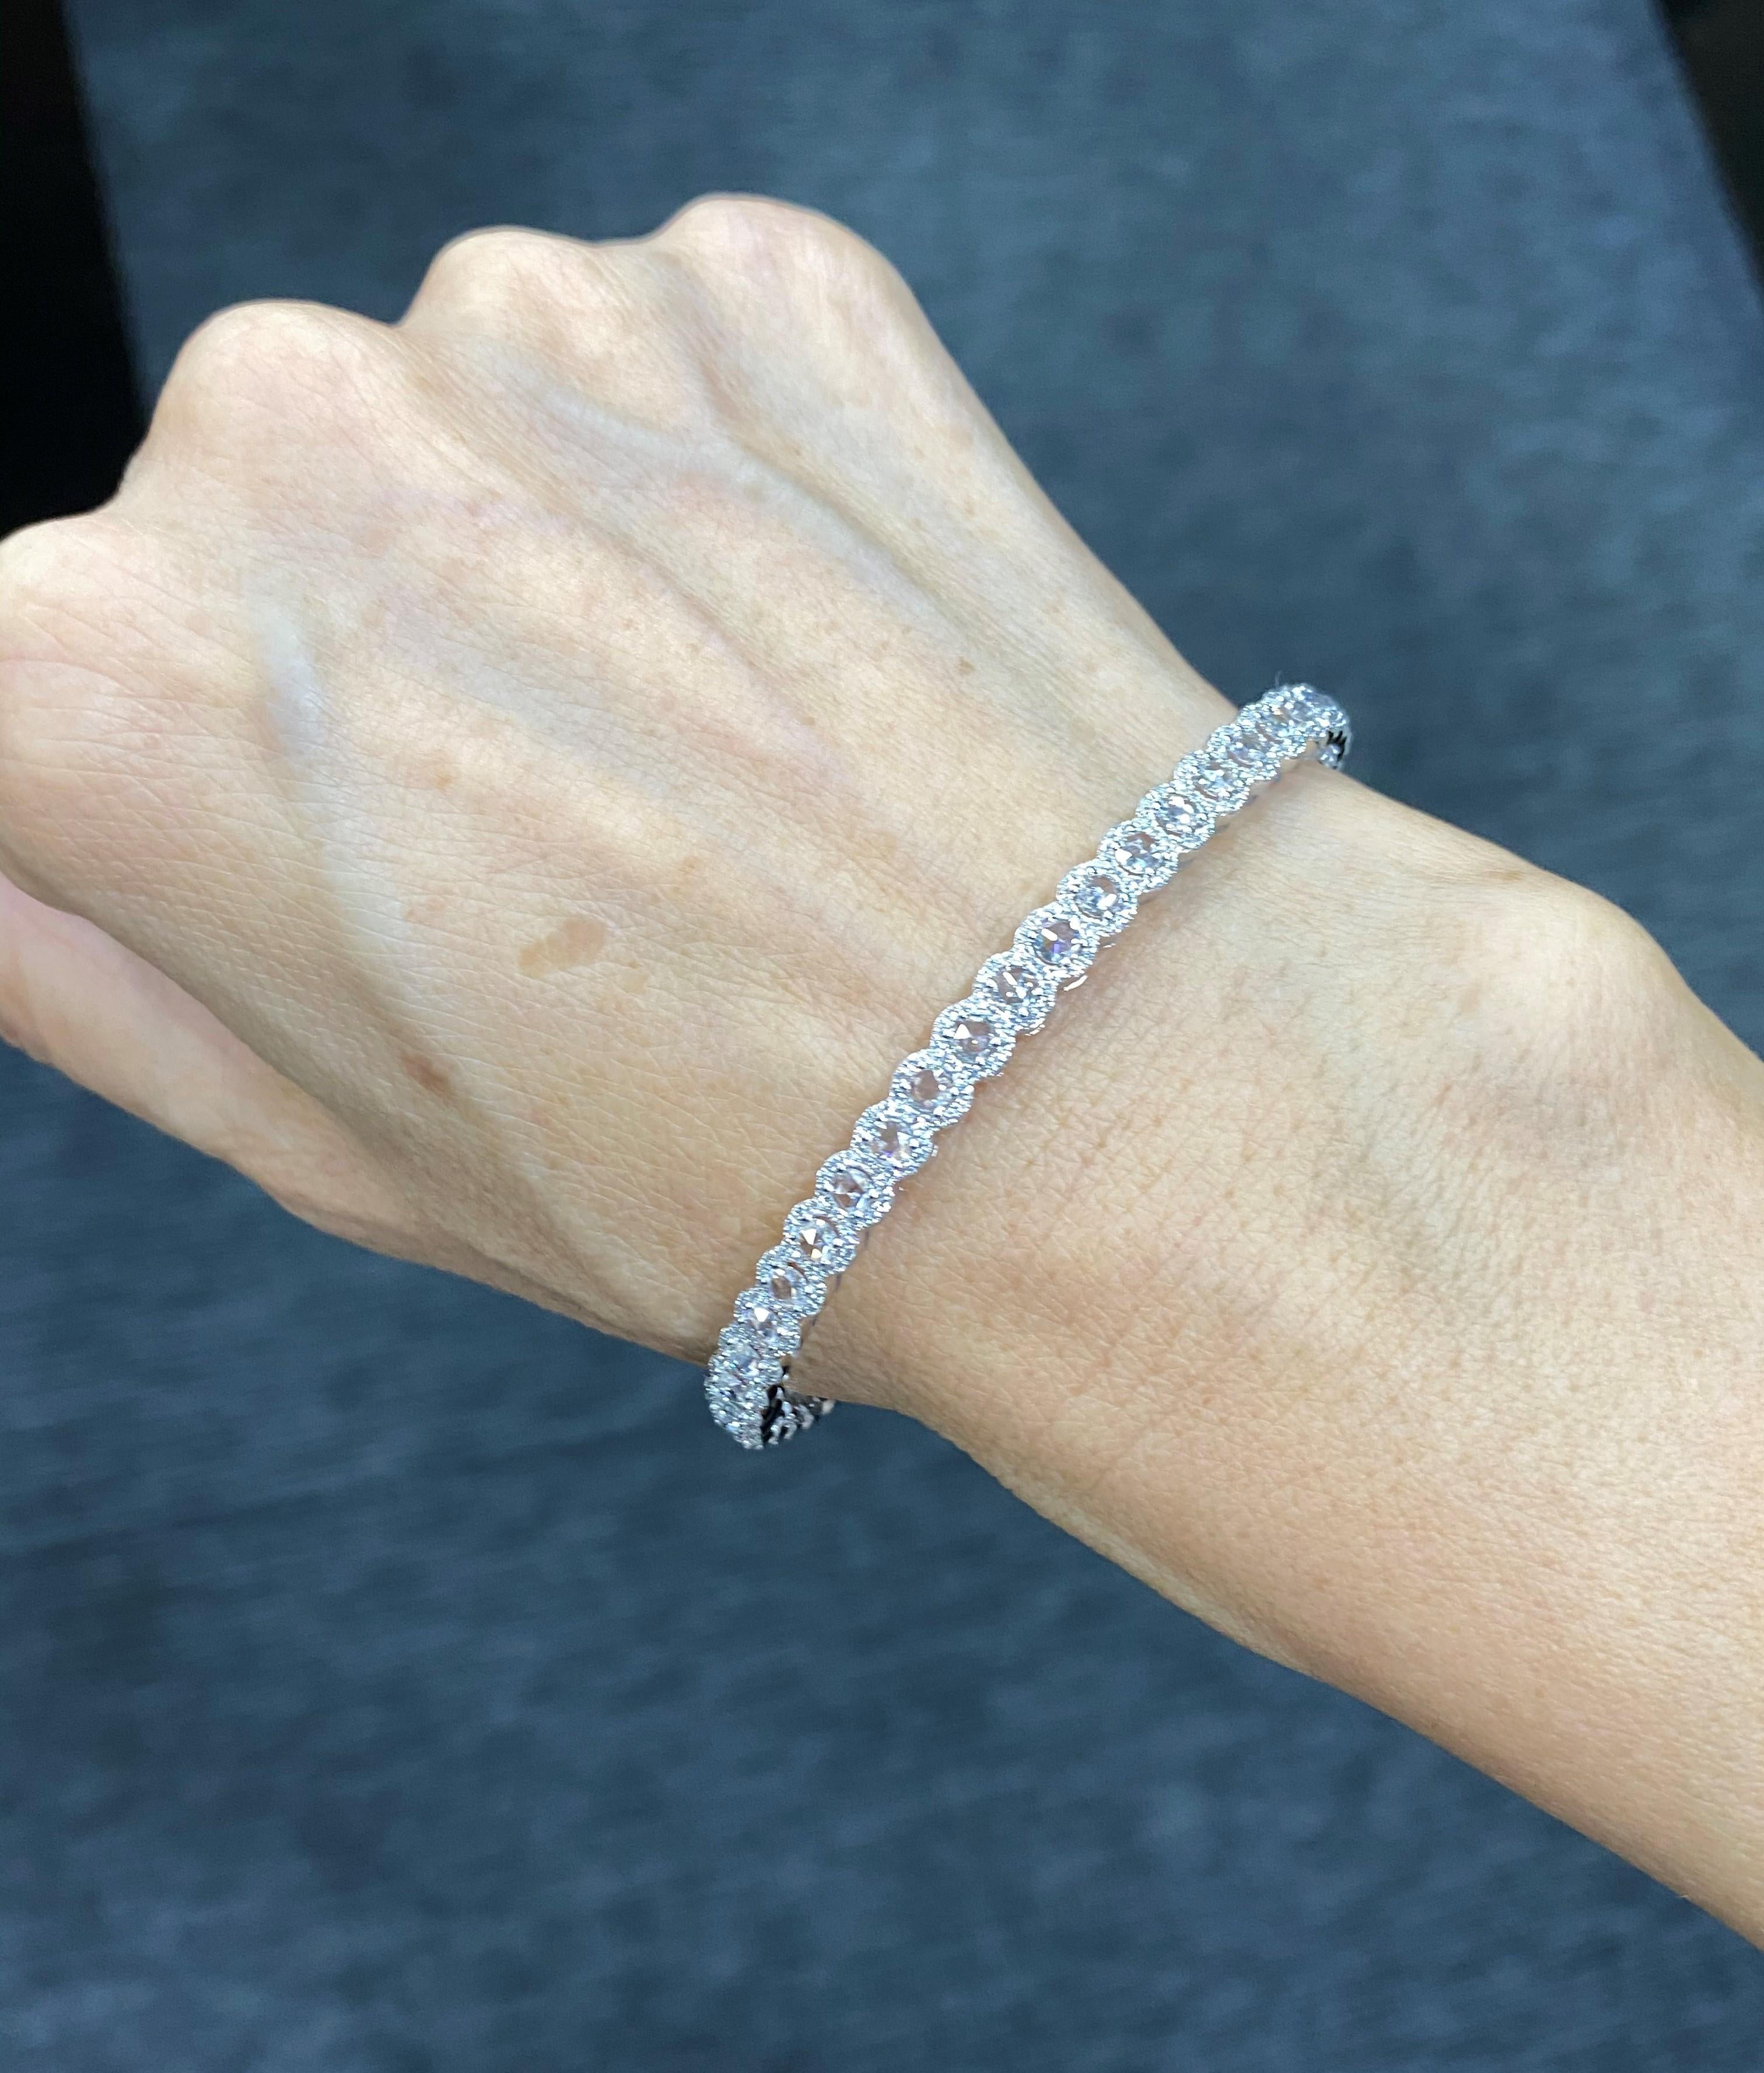 3.76 Carat Rose Cut & Round Diamond 18 Karat White Gold Bangle   

Our Rose Cut & Round Diamond bangle is extremely wearable. Its versatility and classic design make it a great accompaniment to various occasions. Beautifully made with calibrated